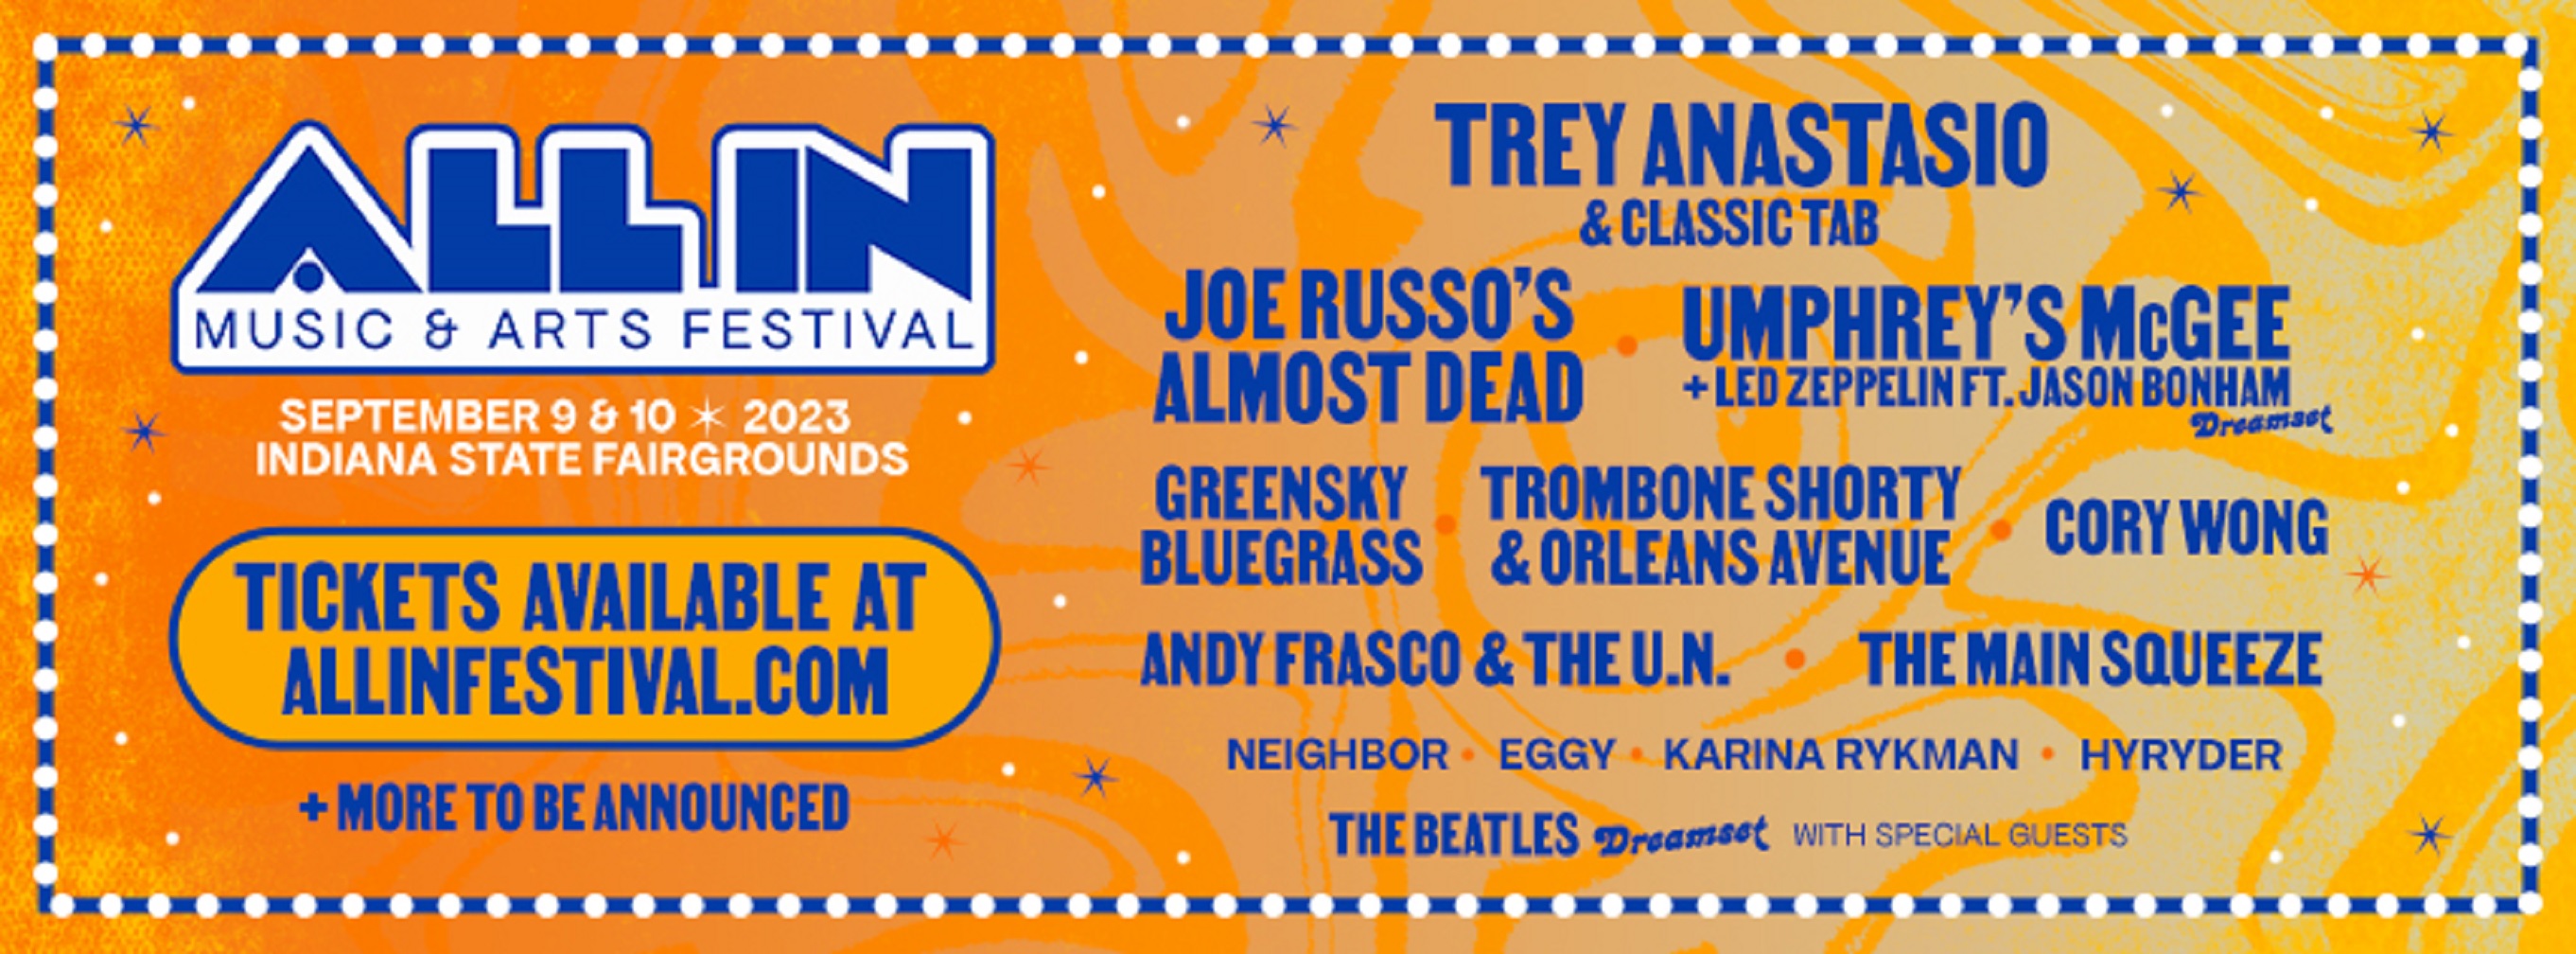 ALL IN Music & Arts Festival returns to Indy Sept 9 & 10 feat. Trey Anastasio & Classic TAB, Joe Russo's Almost Dead, Umphrey's McGee & many more!